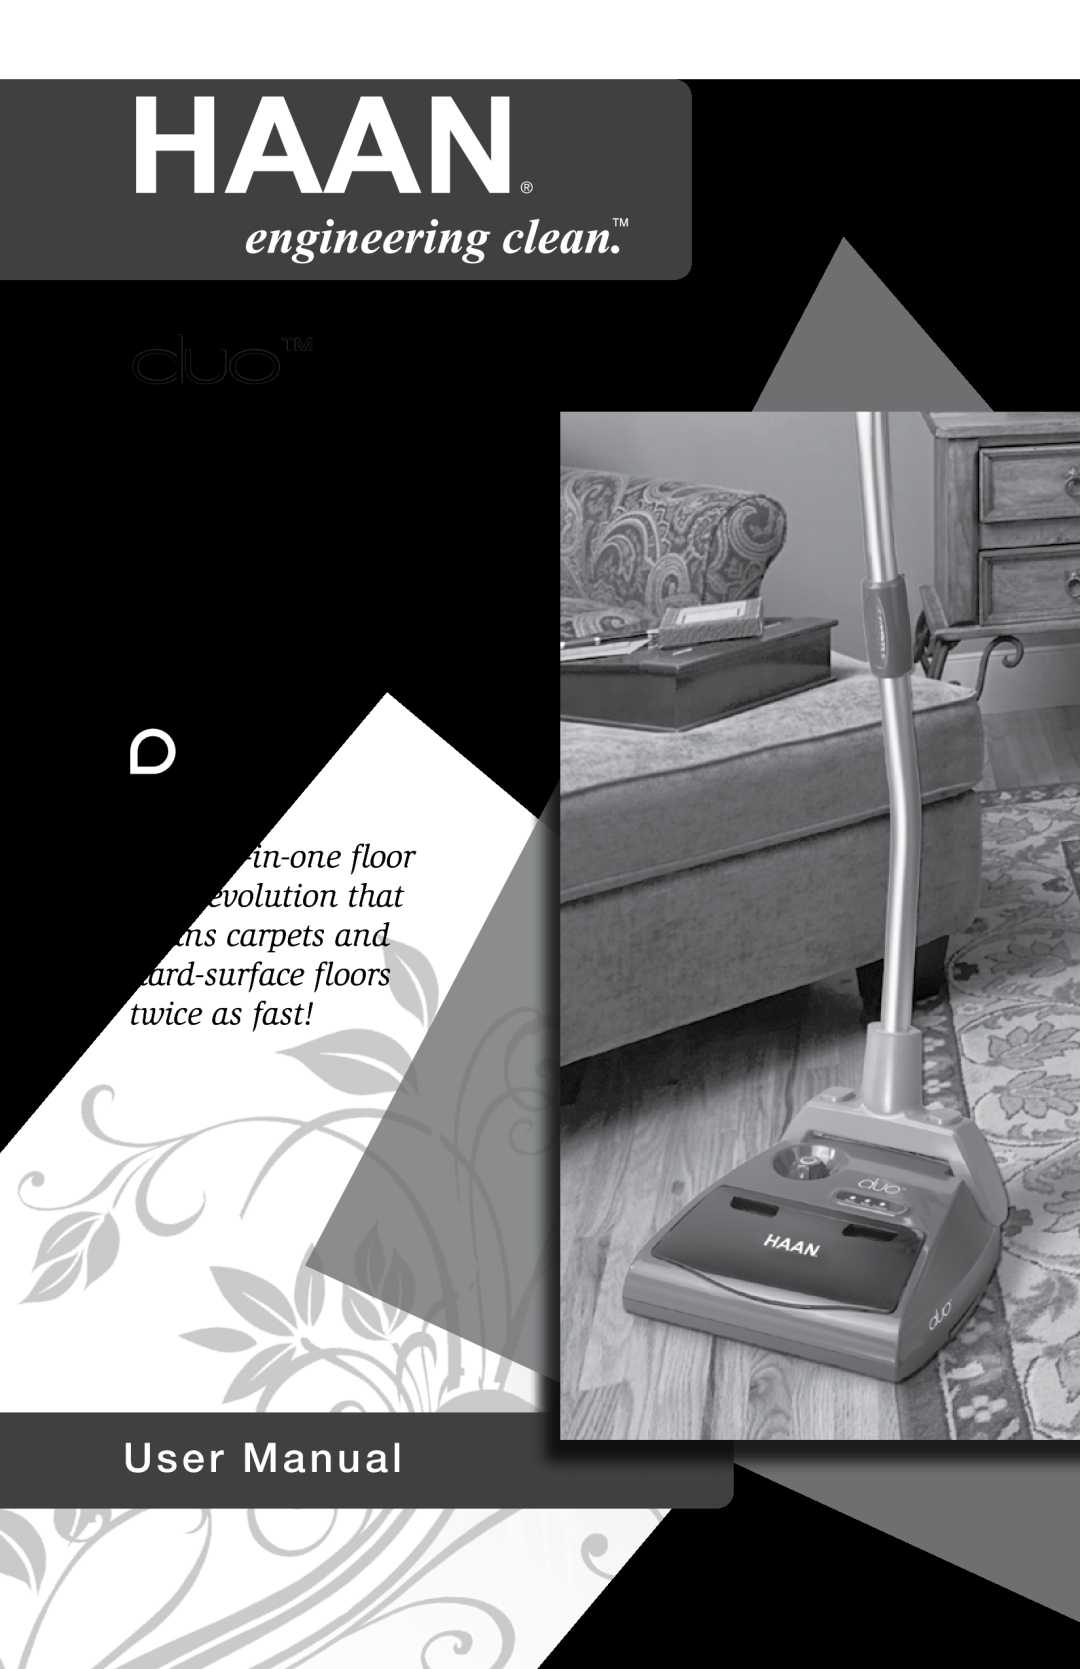 Haan HD-50 user manual Steam Sweeper, Floor Sanitizer, Featuring the Power-Lift Brush, with Gentle Ultra-Grip Bristles 